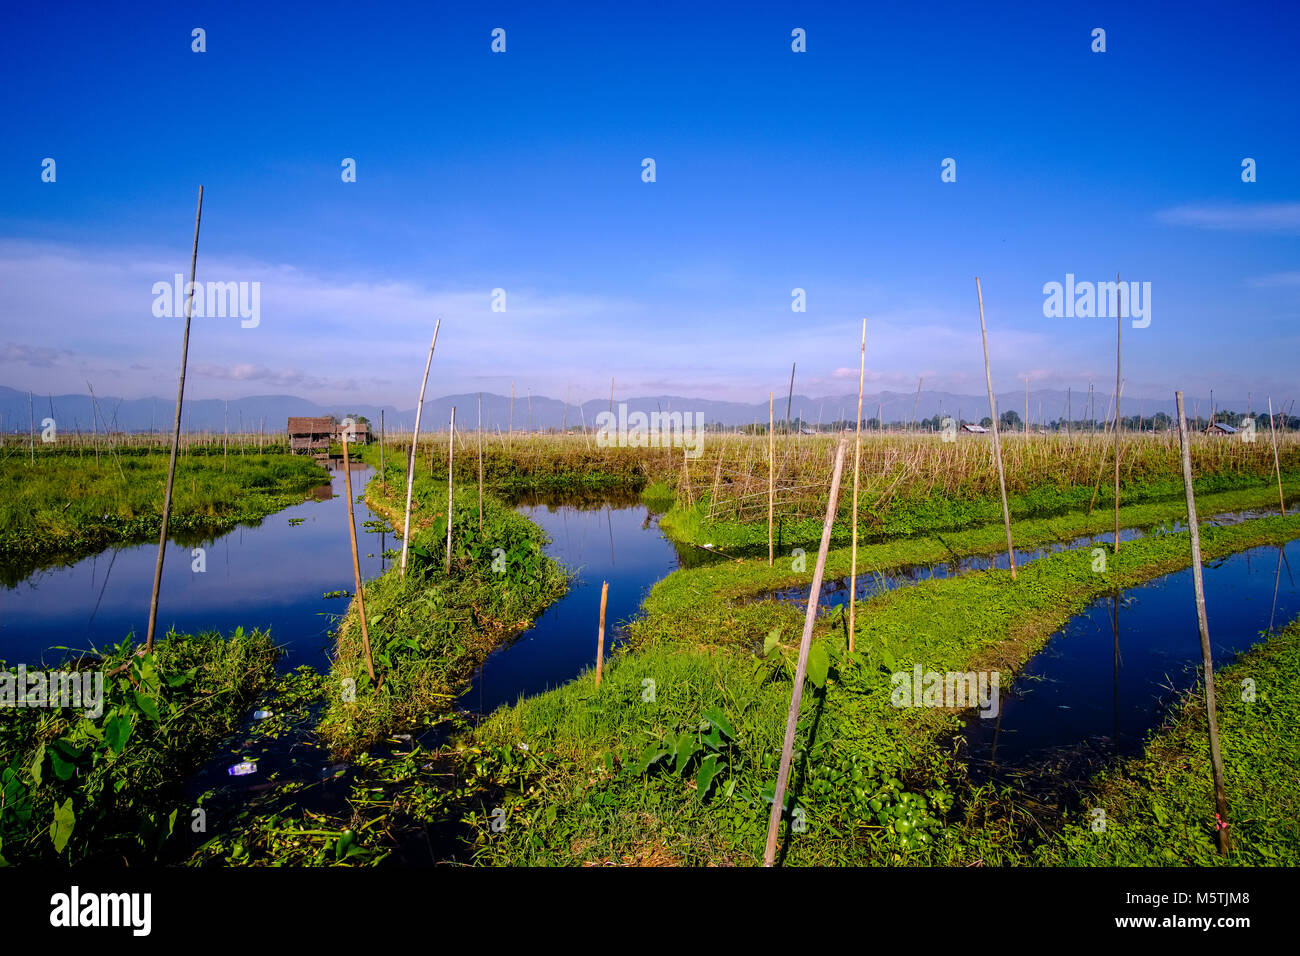 Swimming gardens are set up on Inle lake to grow tomatoes and other vegetables on Inle lake Stock Photo